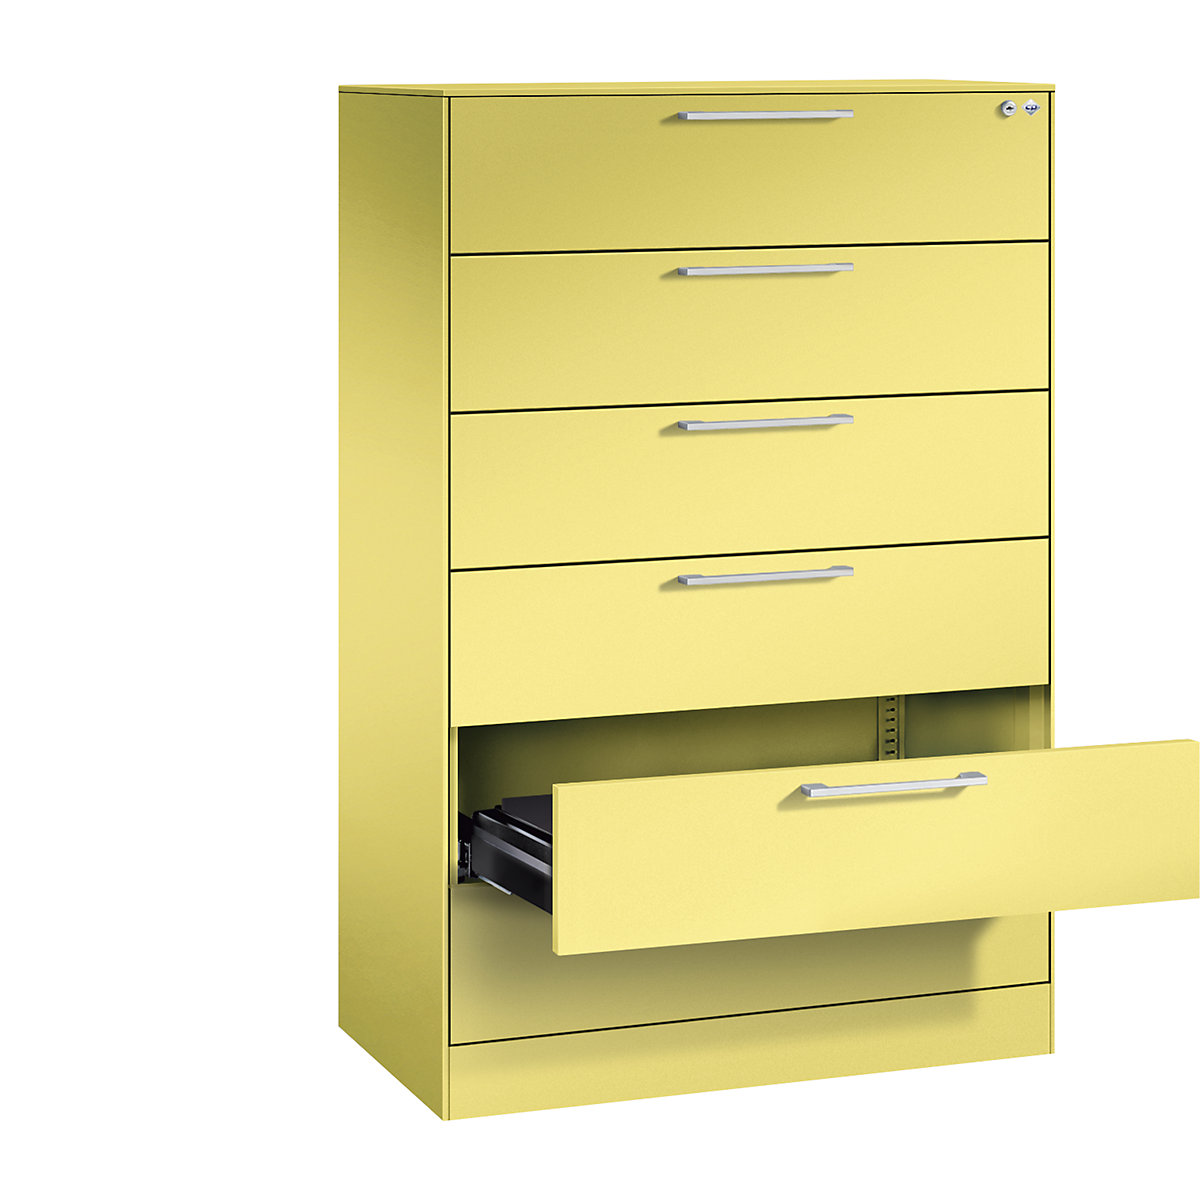 ASISTO card file cabinet – C+P, height 1292 mm, with 6 drawers, A5 landscape, sulphur yellow/sulphur yellow-3